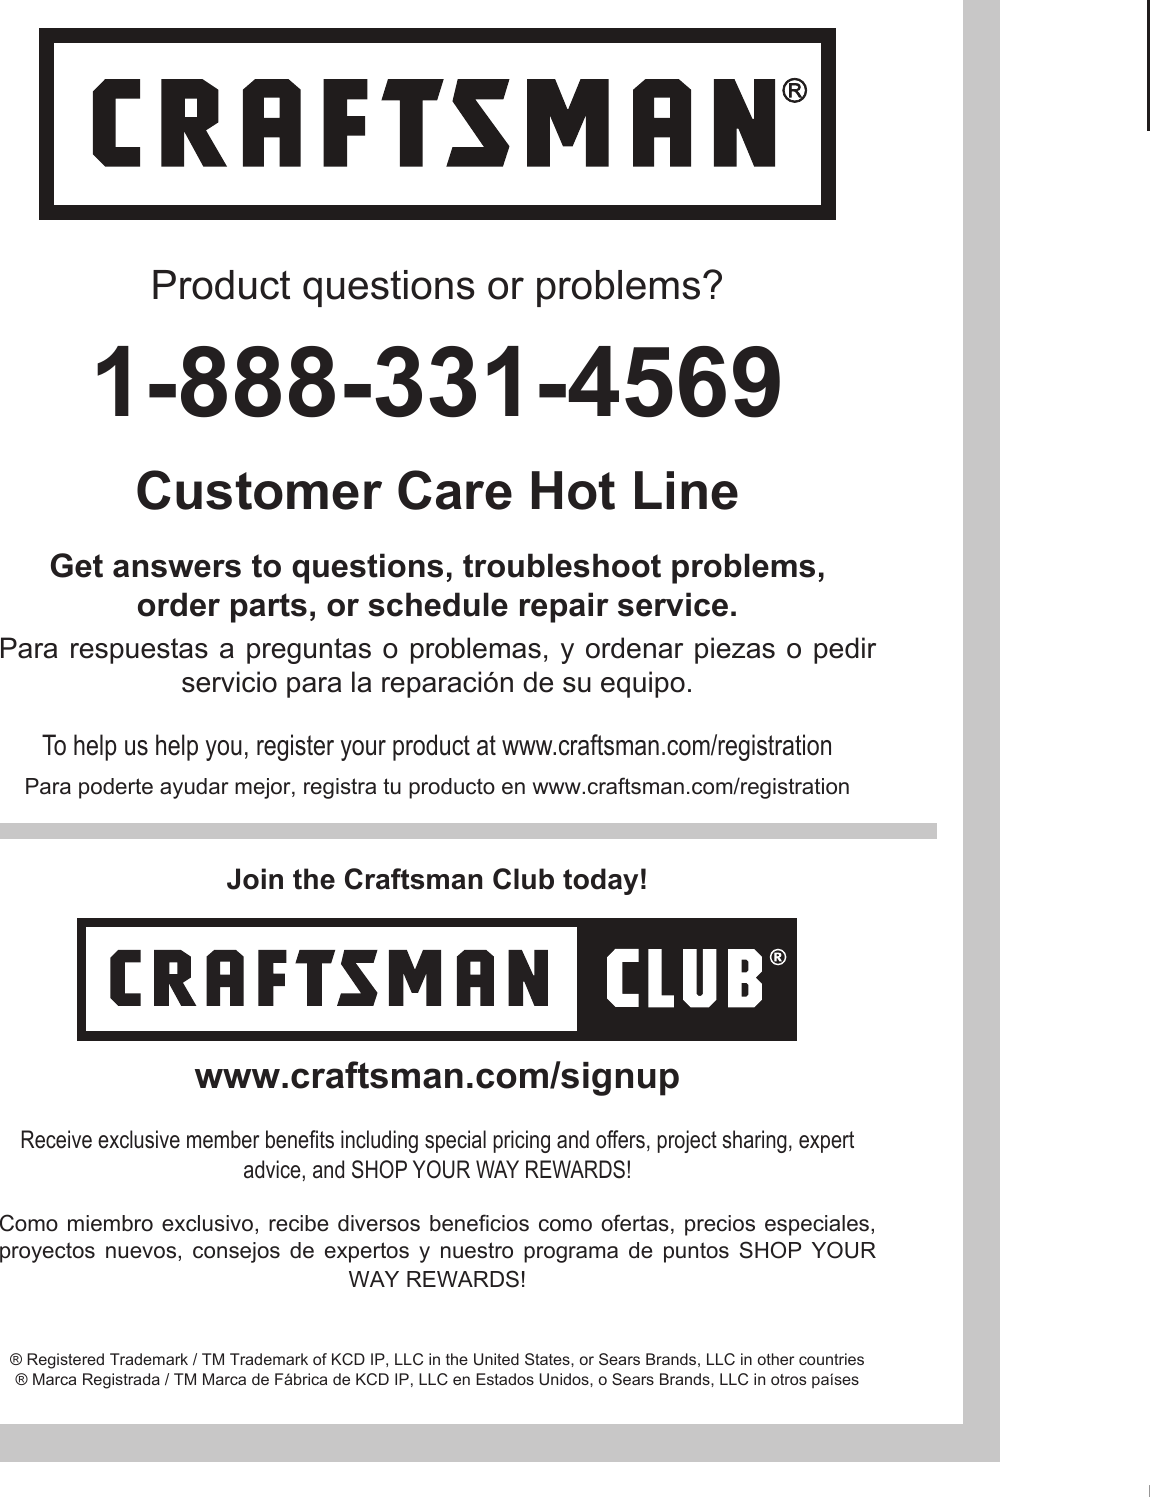 Page 4 of 8 - Craftsman Craftsman-Premium-Heavy-Duty-Hanging-Wall-Cabinet-Use-And-Care-Manual-  Craftsman-premium-heavy-duty-hanging-wall-cabinet-use-and-care-manual